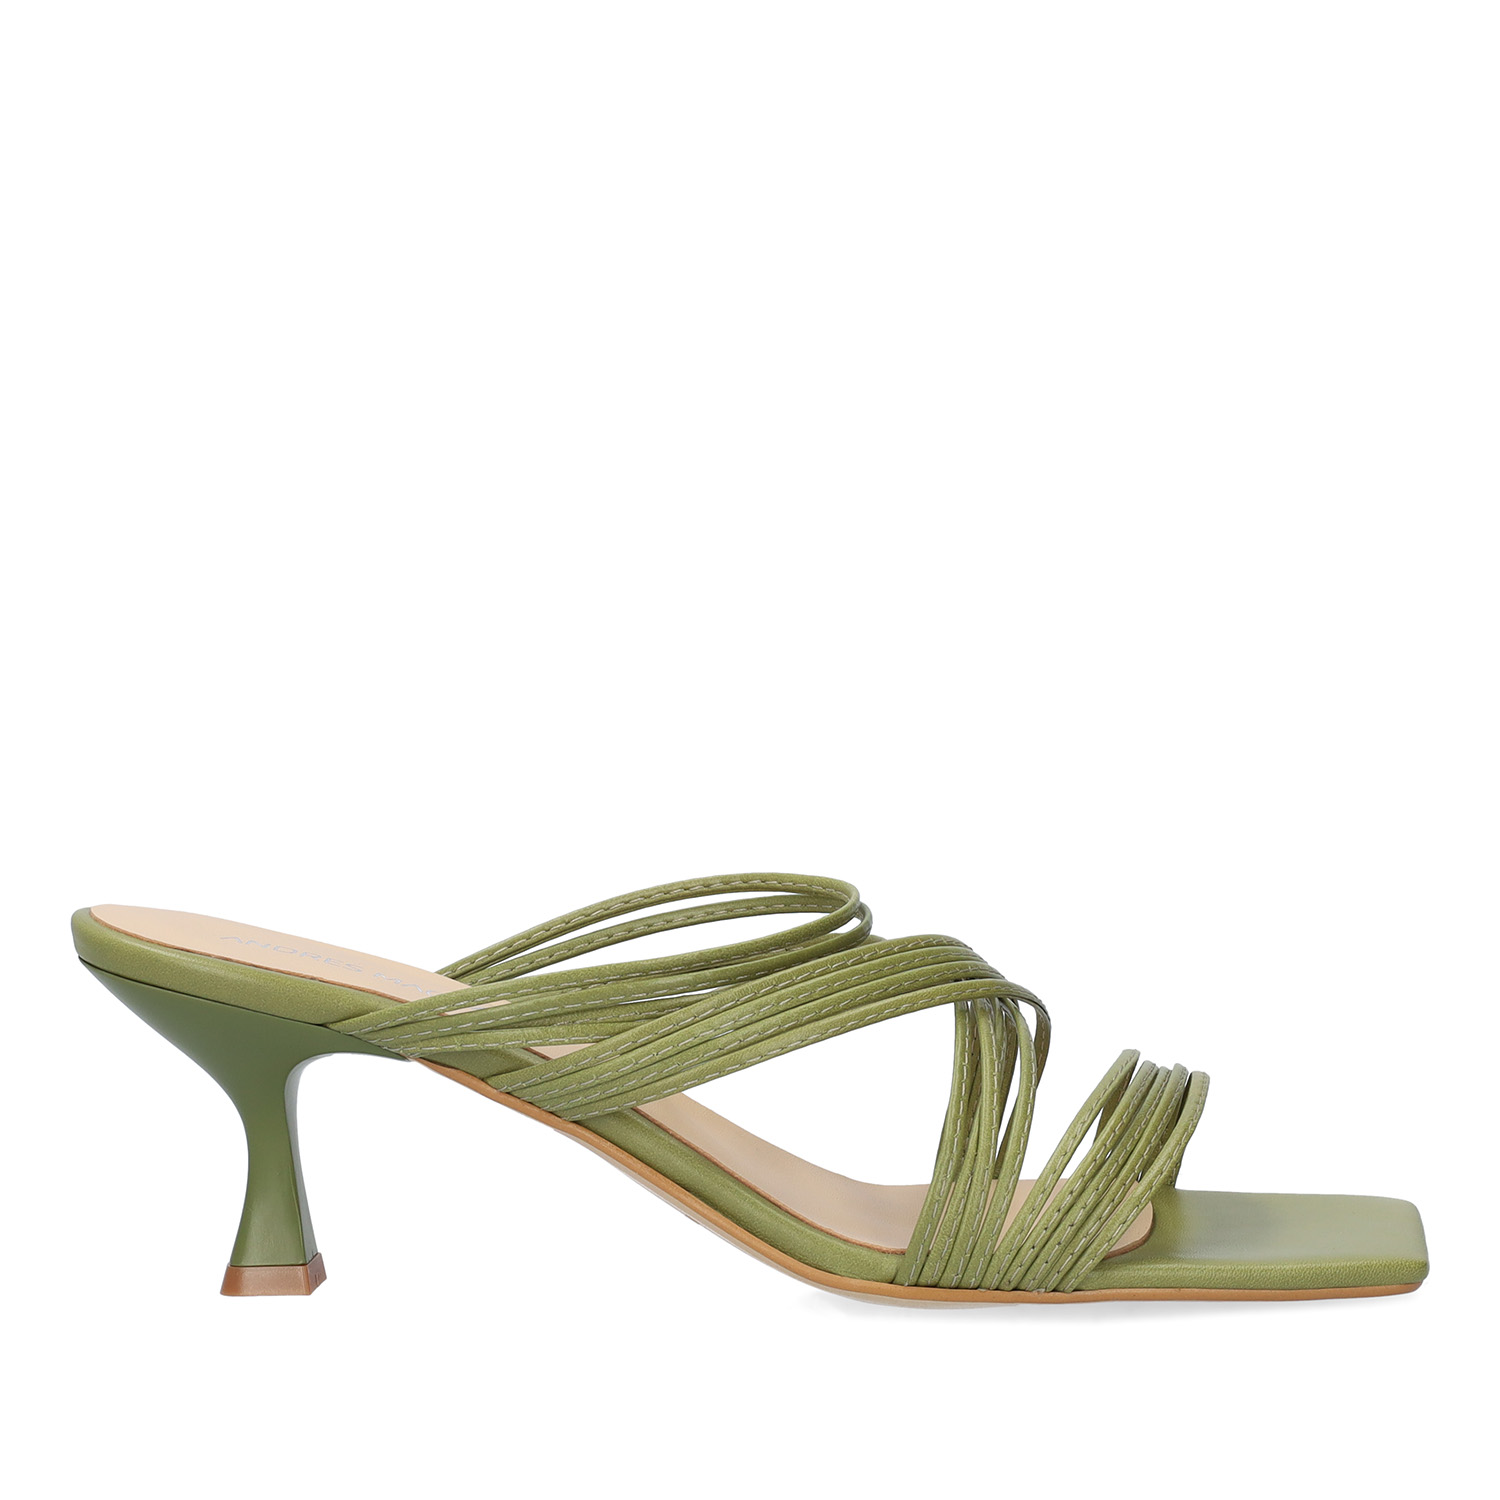 Olive green leather heeled sandals 